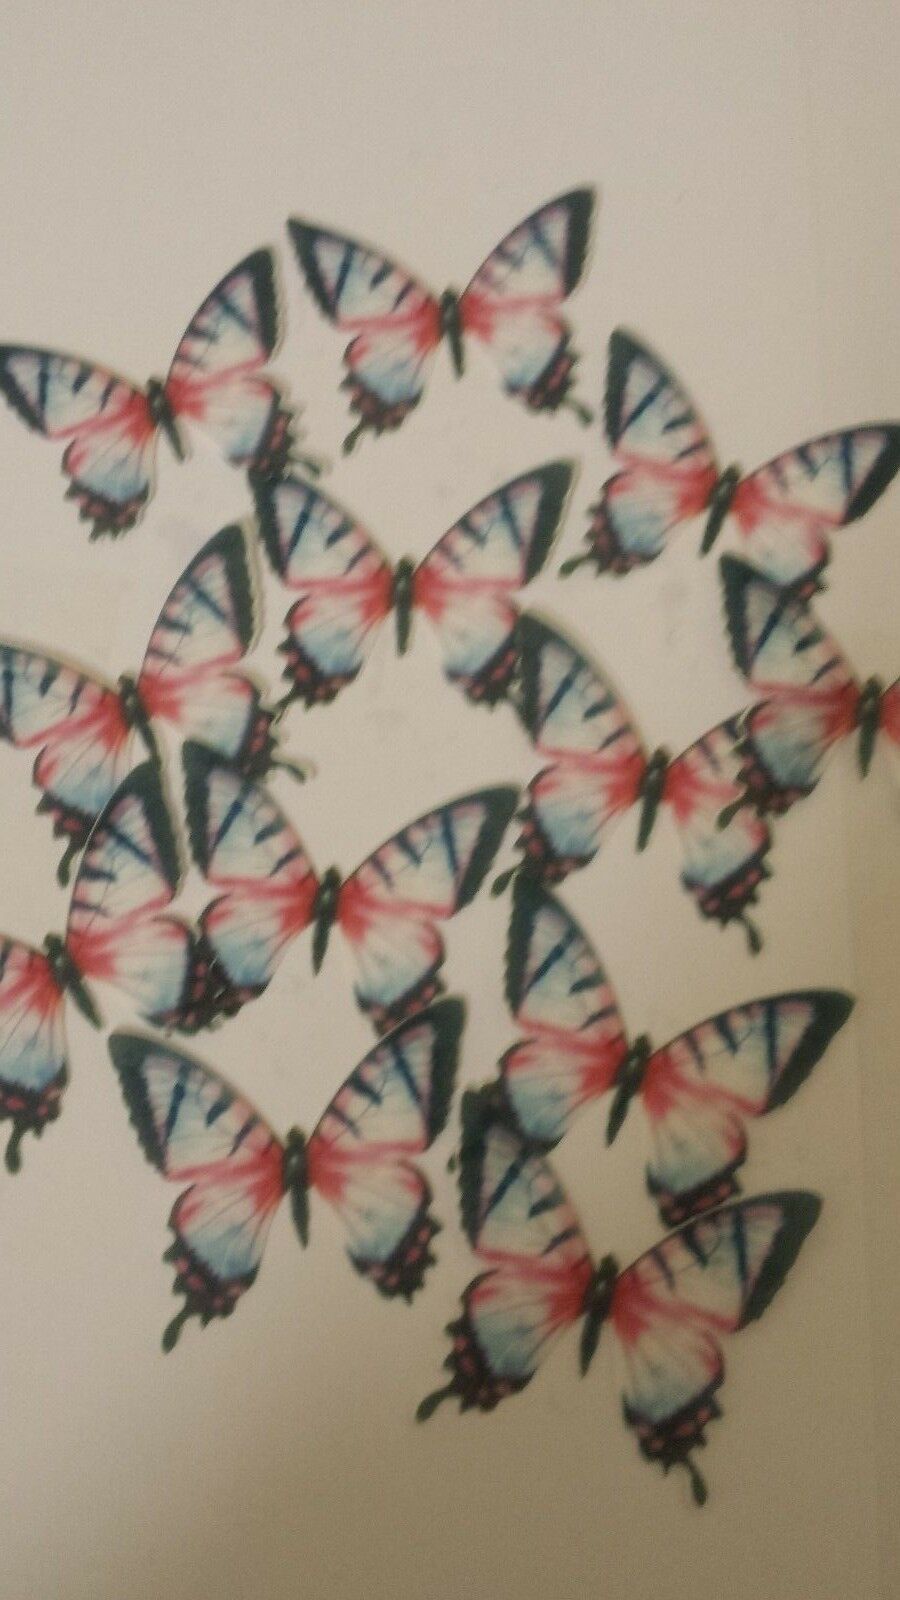 12 Precut Edible Pastel Pink and Blue Butterflies for cakes and cupcake toppers